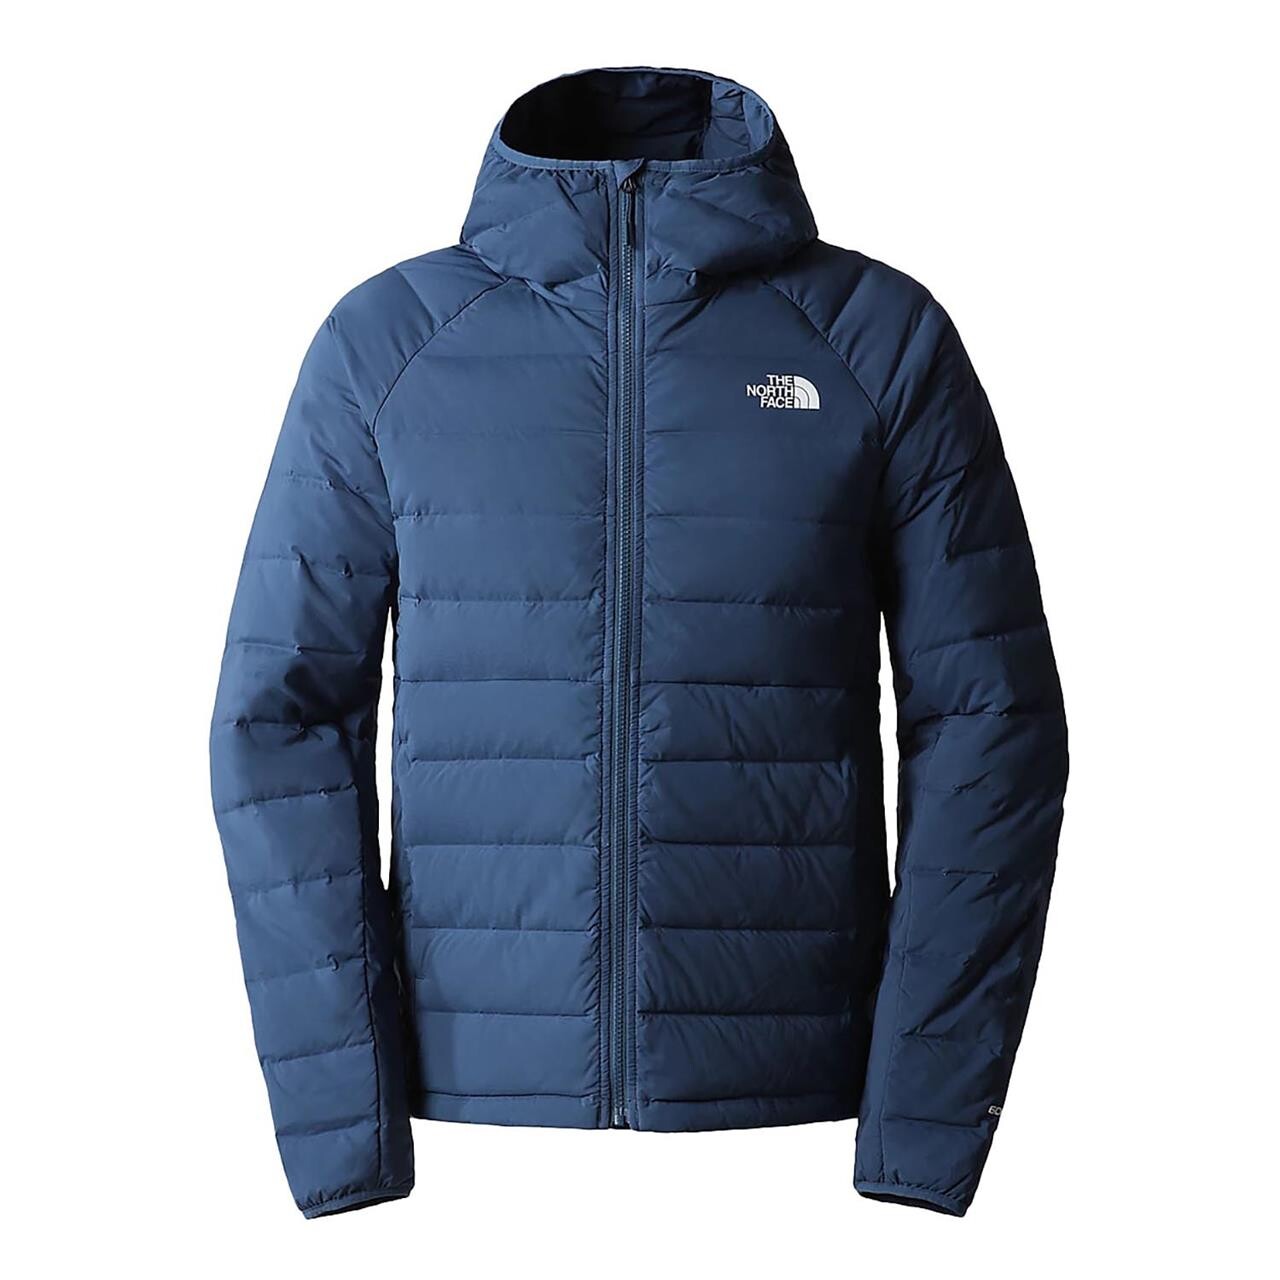 Se The North Face Mens Belleview Stretch Down Hoodie (Blå (SHADY BLUE) Small) hos Friluftsland.dk